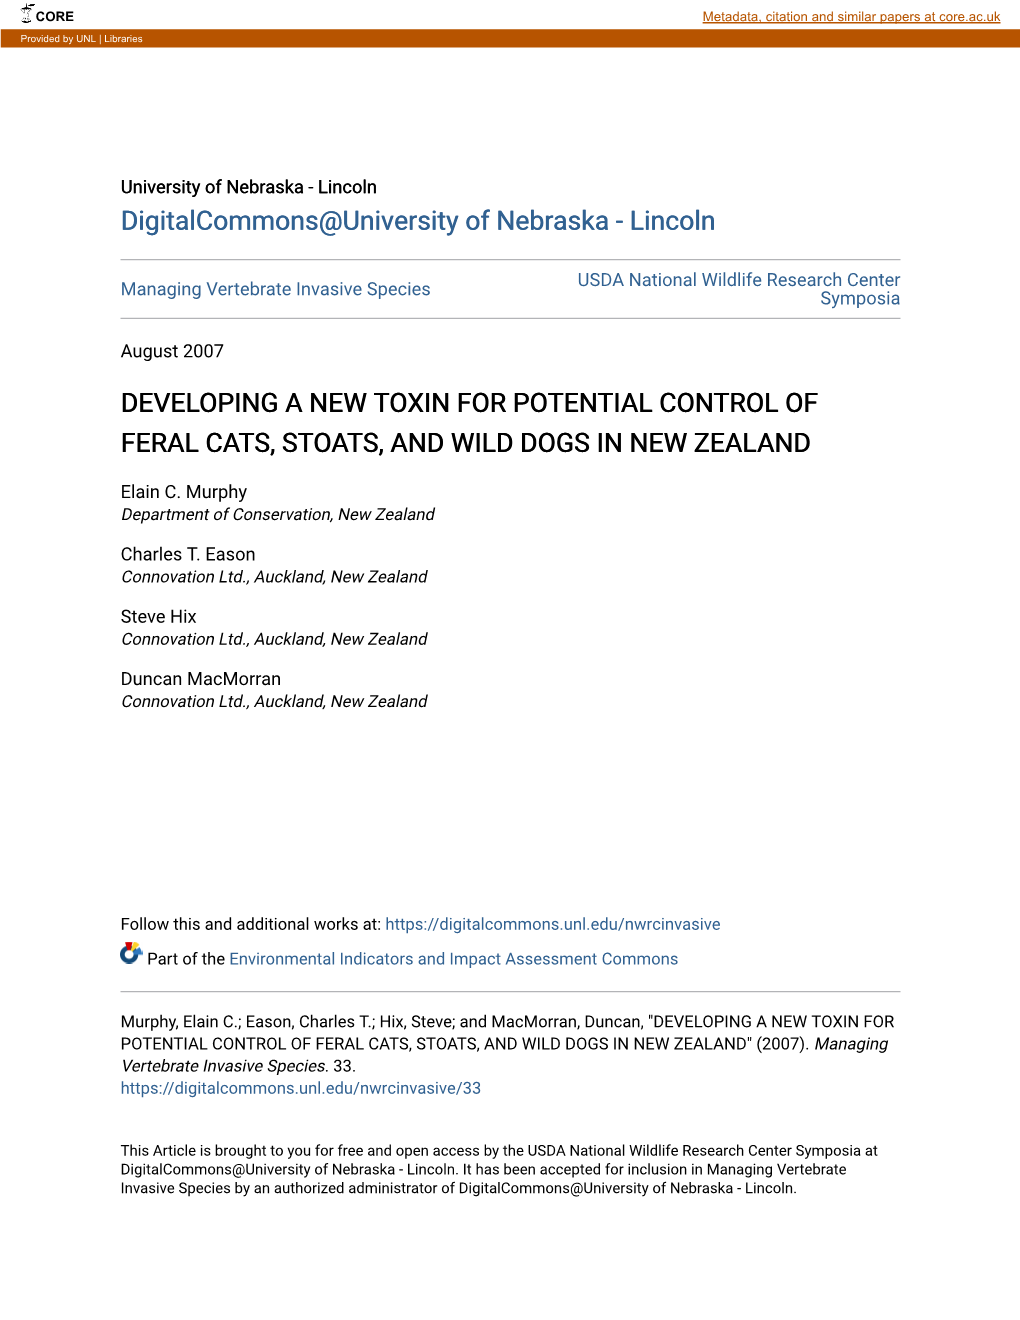 Developing a New Toxin for Potential Control of Feral Cats, Stoats, and Wild Dogs in New Zealand